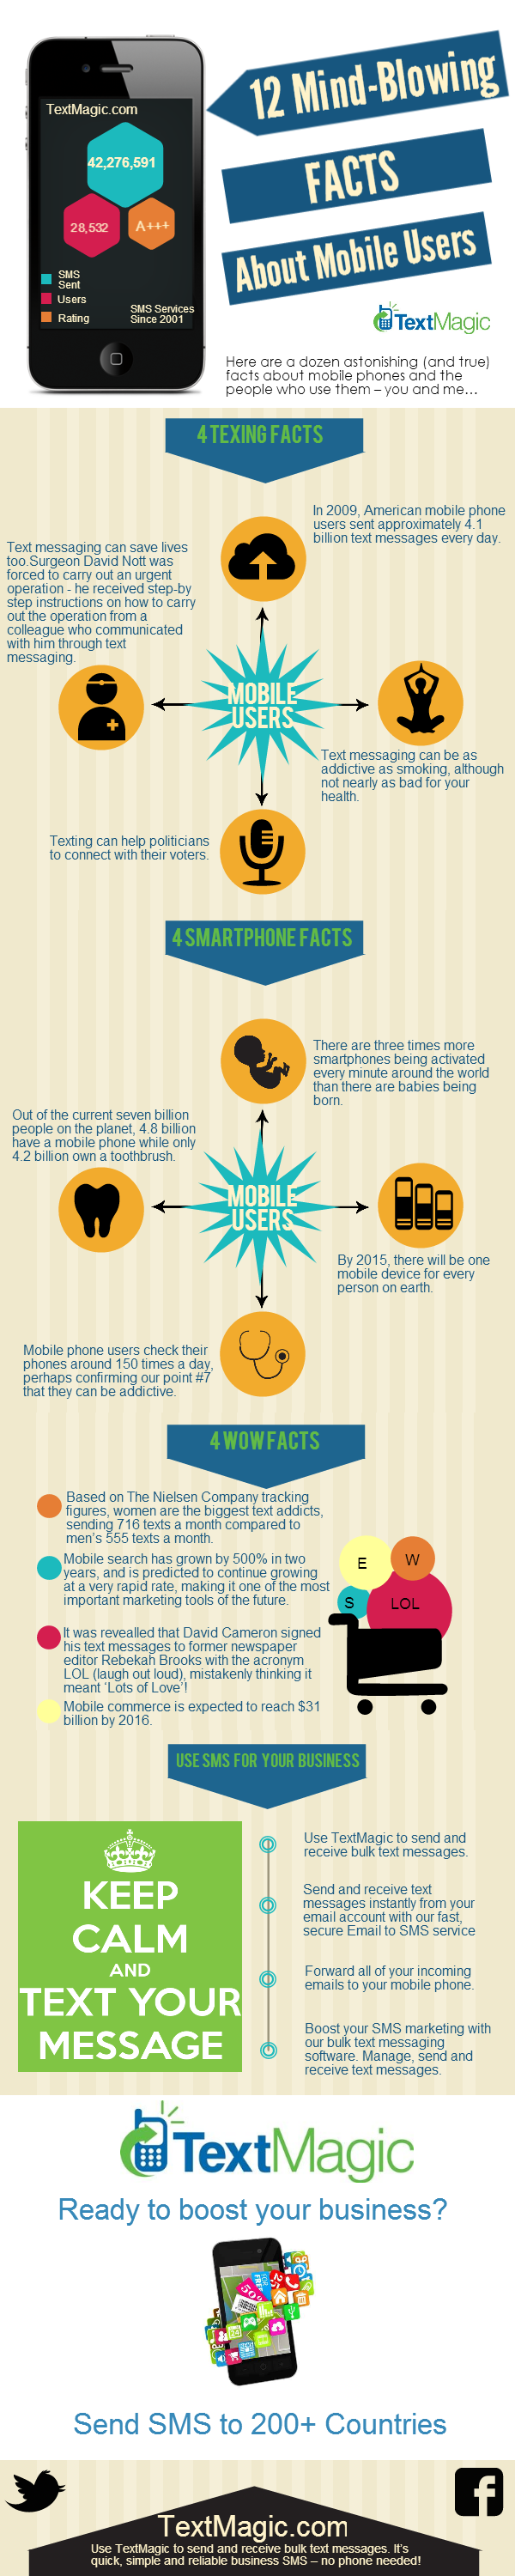 Few interesting statistics about Mobile users across the world